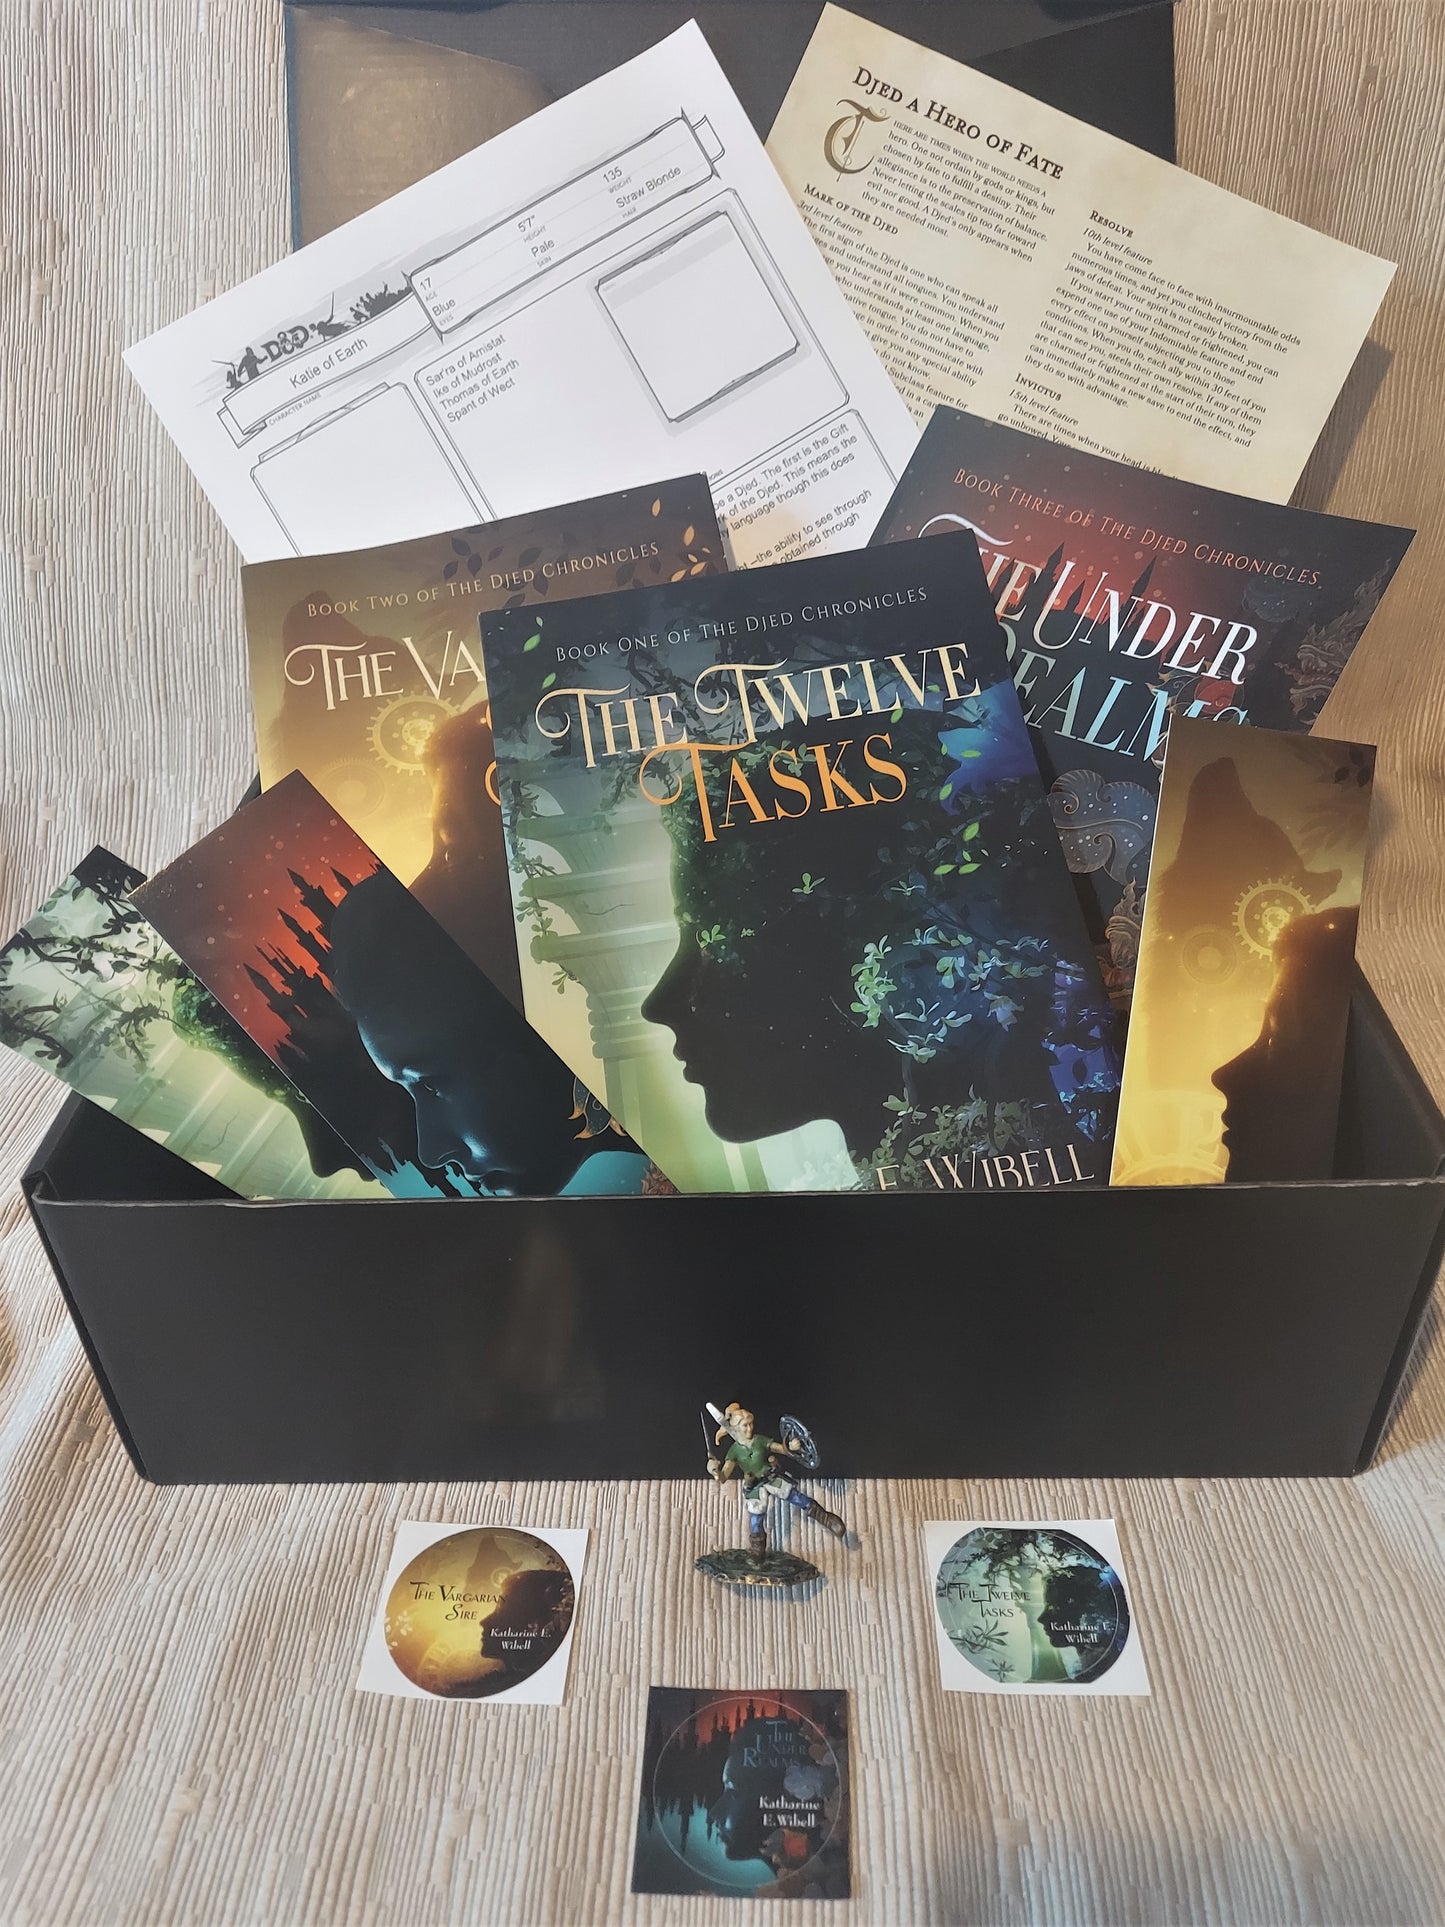 DnD Book Box: Three Book Collection of The Djed Chronicles